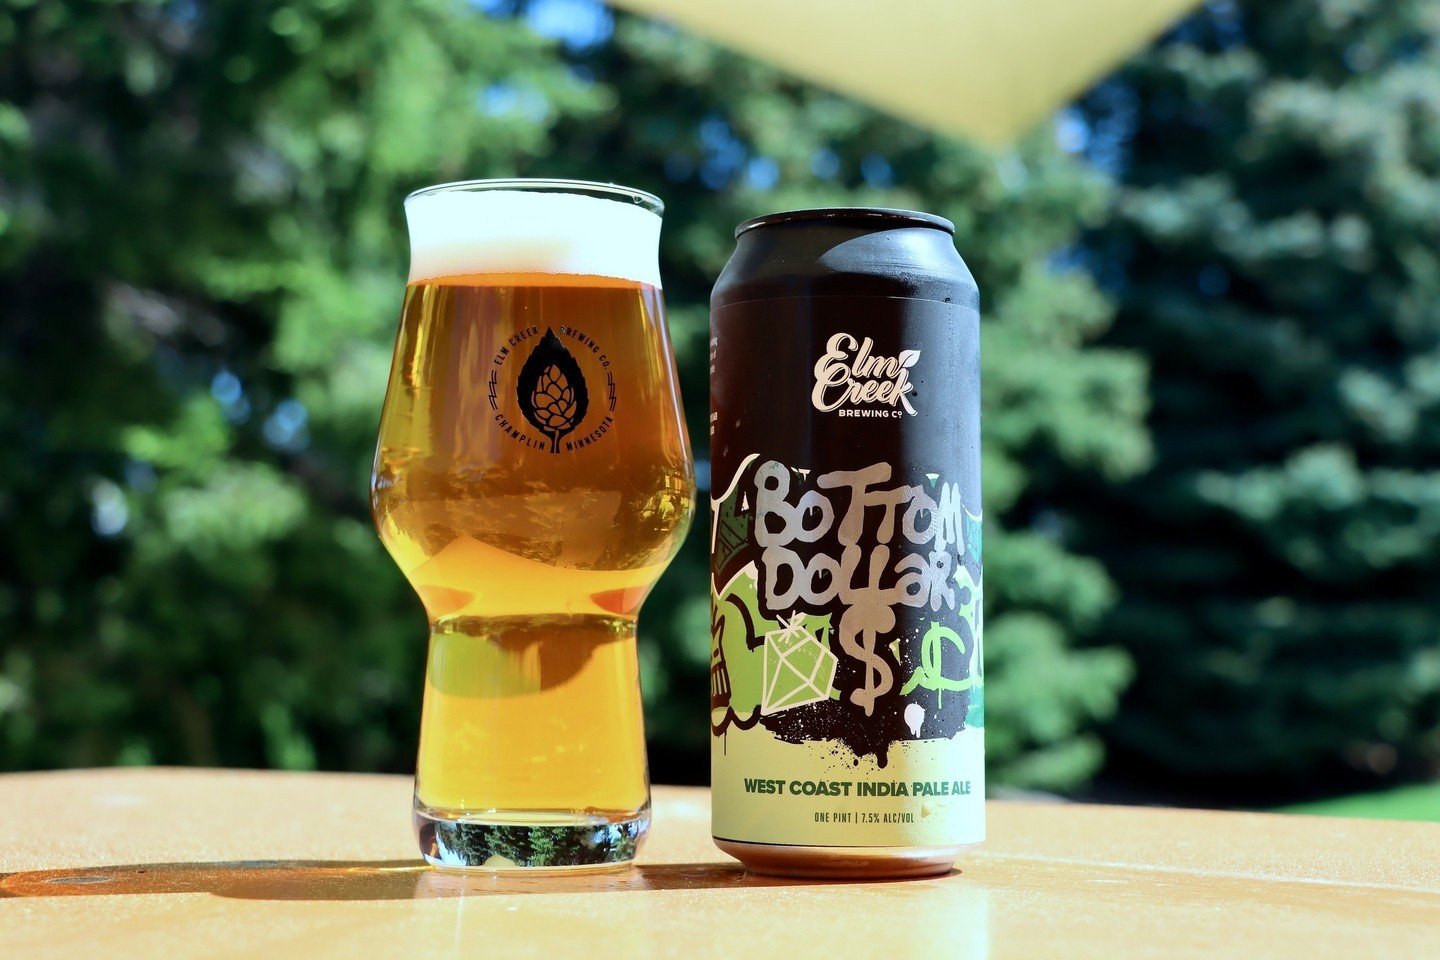 It's giving ⚡️ WEEKEND VIBES ⚡️ ⁠
⁠
Bottom Dollar West Coast IPA- yes please! This crispy, hoppy, crusher of a beer is such an awesome addition to any beer fridge!⁠
⁠
🍺  Celebrate the long holiday weekend with something you deserve! Pick up a 4-pack